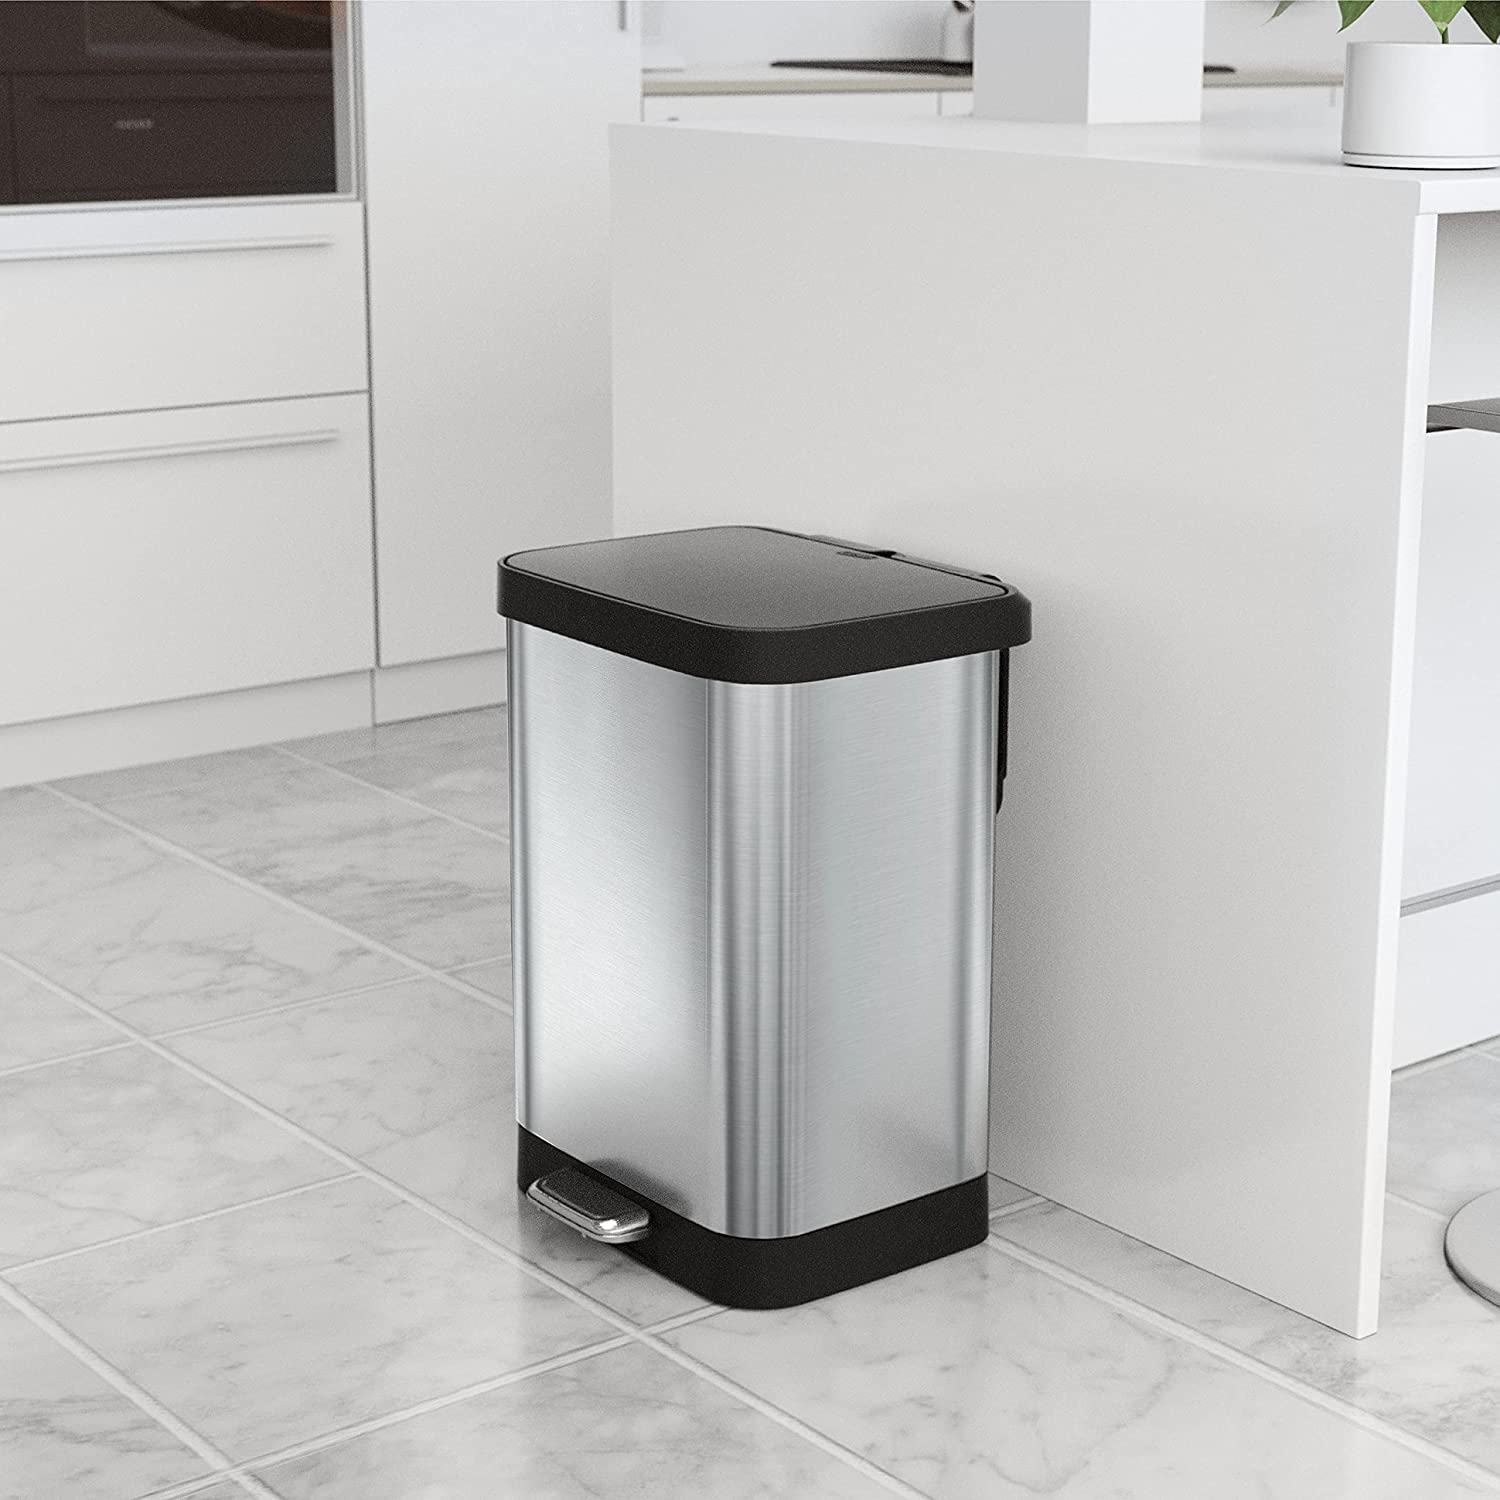 https://bigbigmart.com/wp-content/uploads/2023/05/Glad-GLD-74506-Stainless-Steel-Step-Trash-Can-with-Clorox-Odor-Protection-Large-Metal-Kitchen-Garbage-Bin-with-Soft-Close-Lid-Foot-Pedal-and-Waste-Bag-Roll-Holder-13-Gallon-Stainless4.jpg